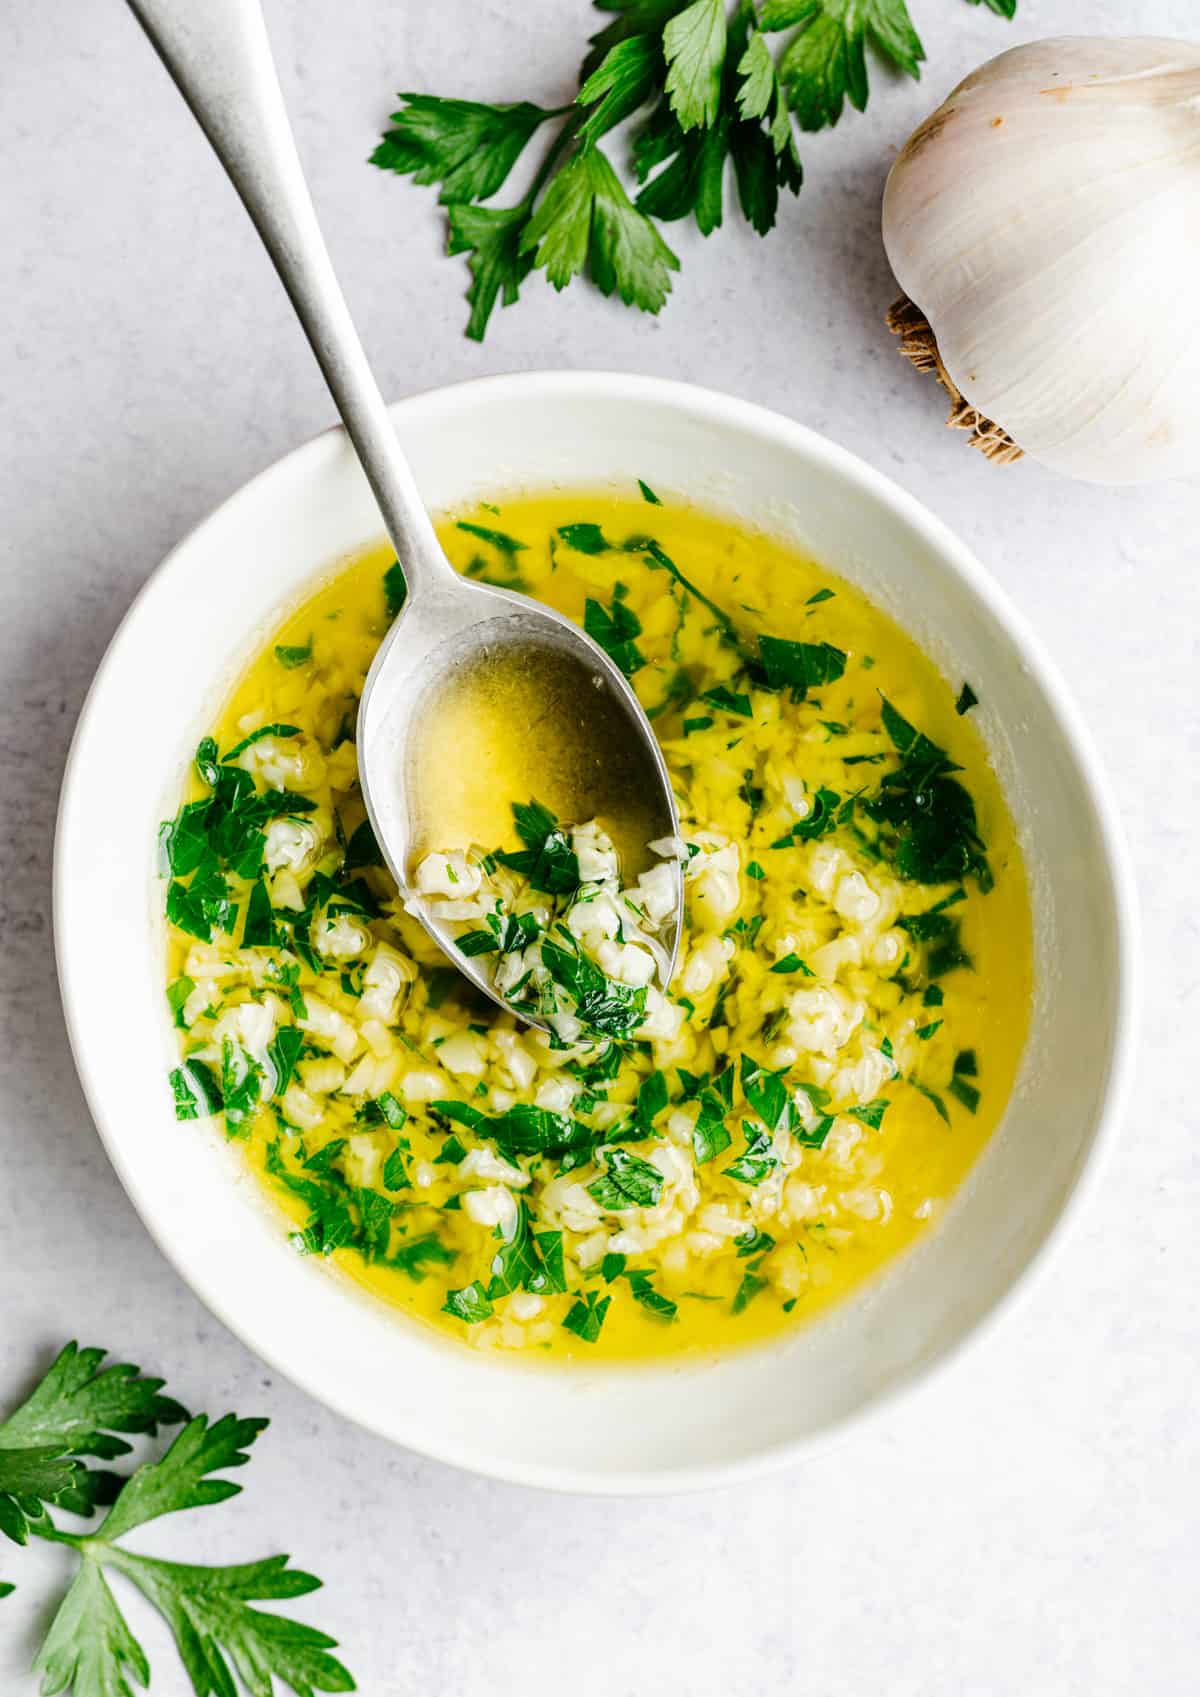 Savory homemade garlic sauce with herbs in a bowl